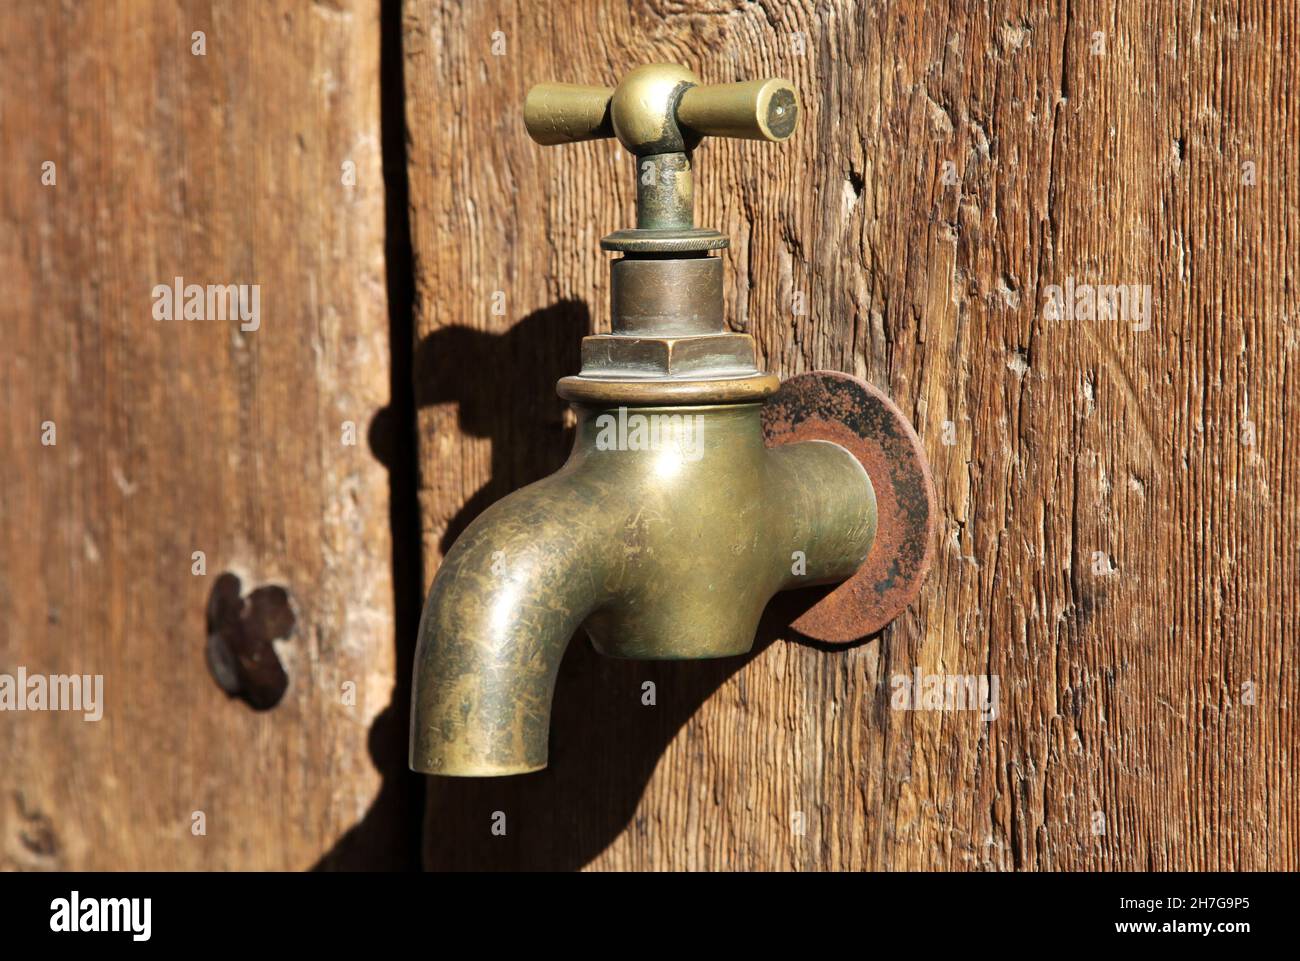 Water-tap of solid brass,faucet on a wooden door. Stock Photo